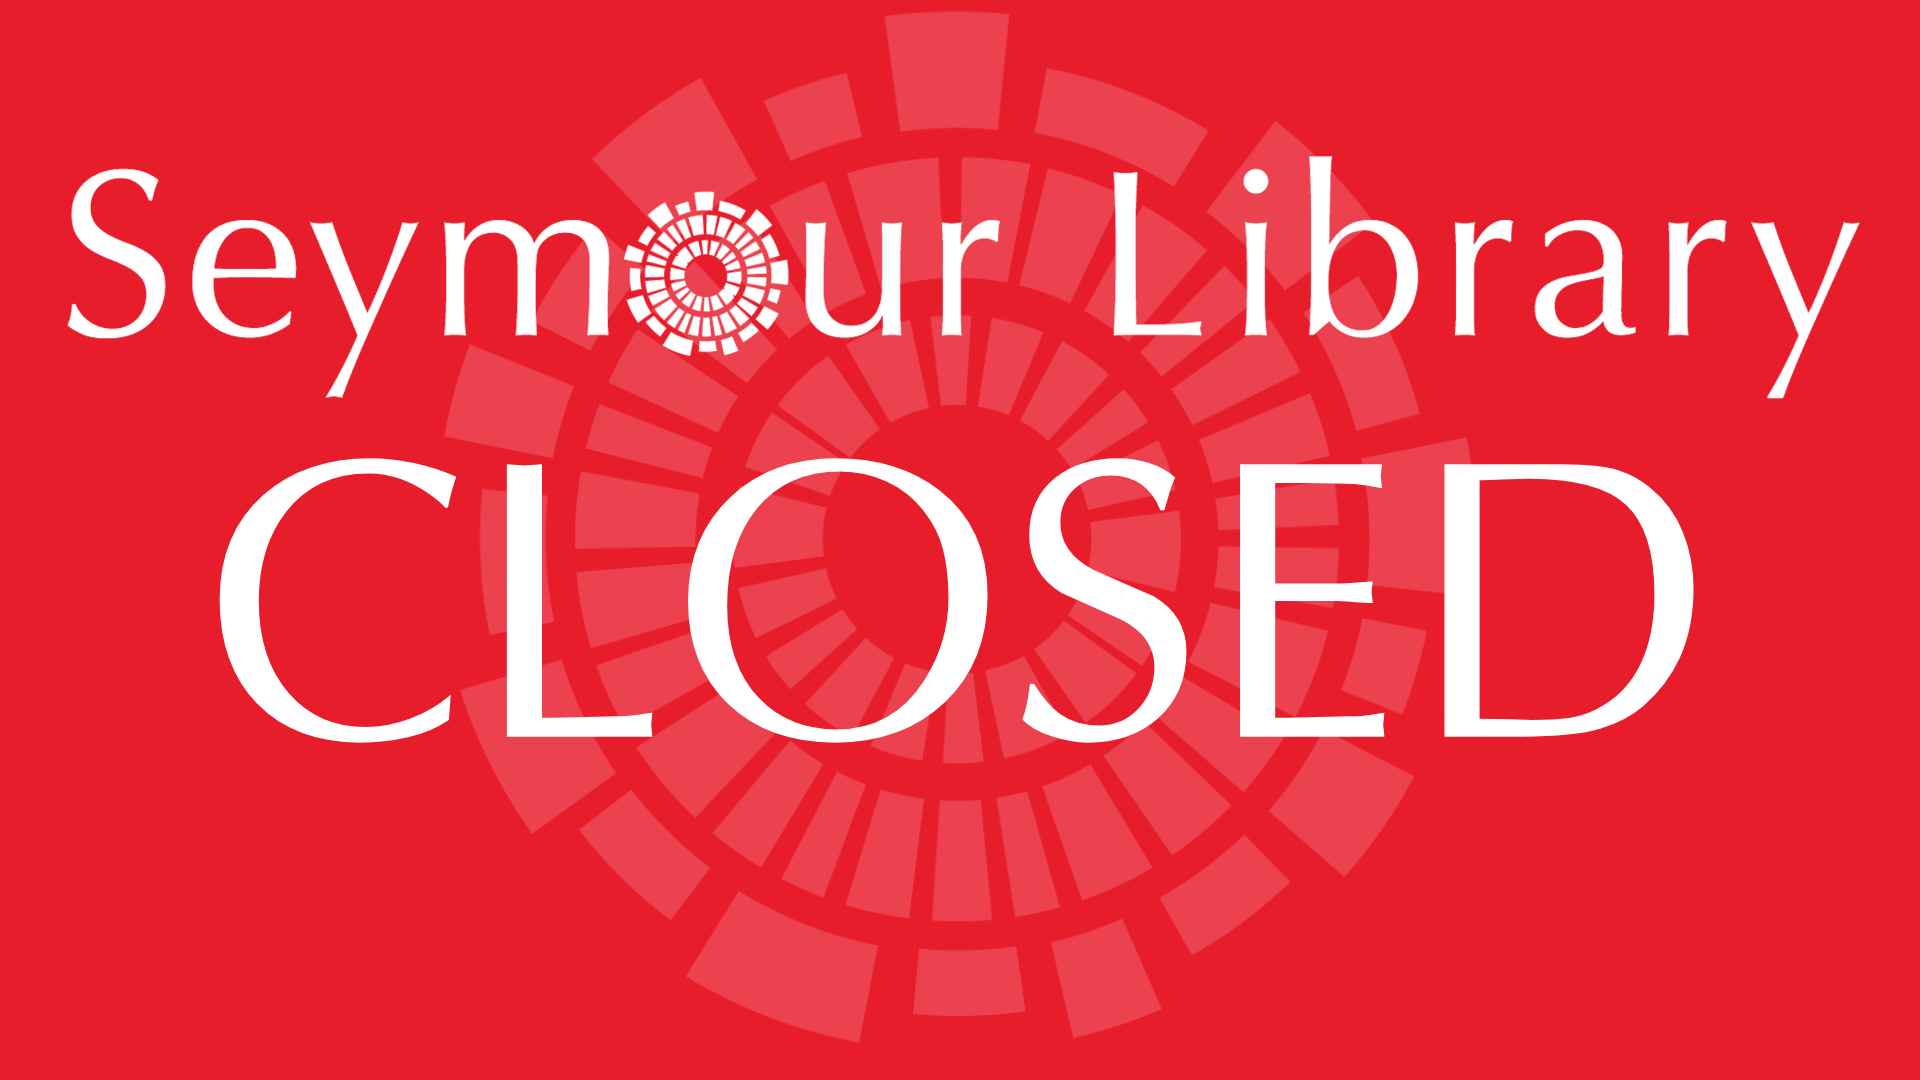 Seymour Library Closed